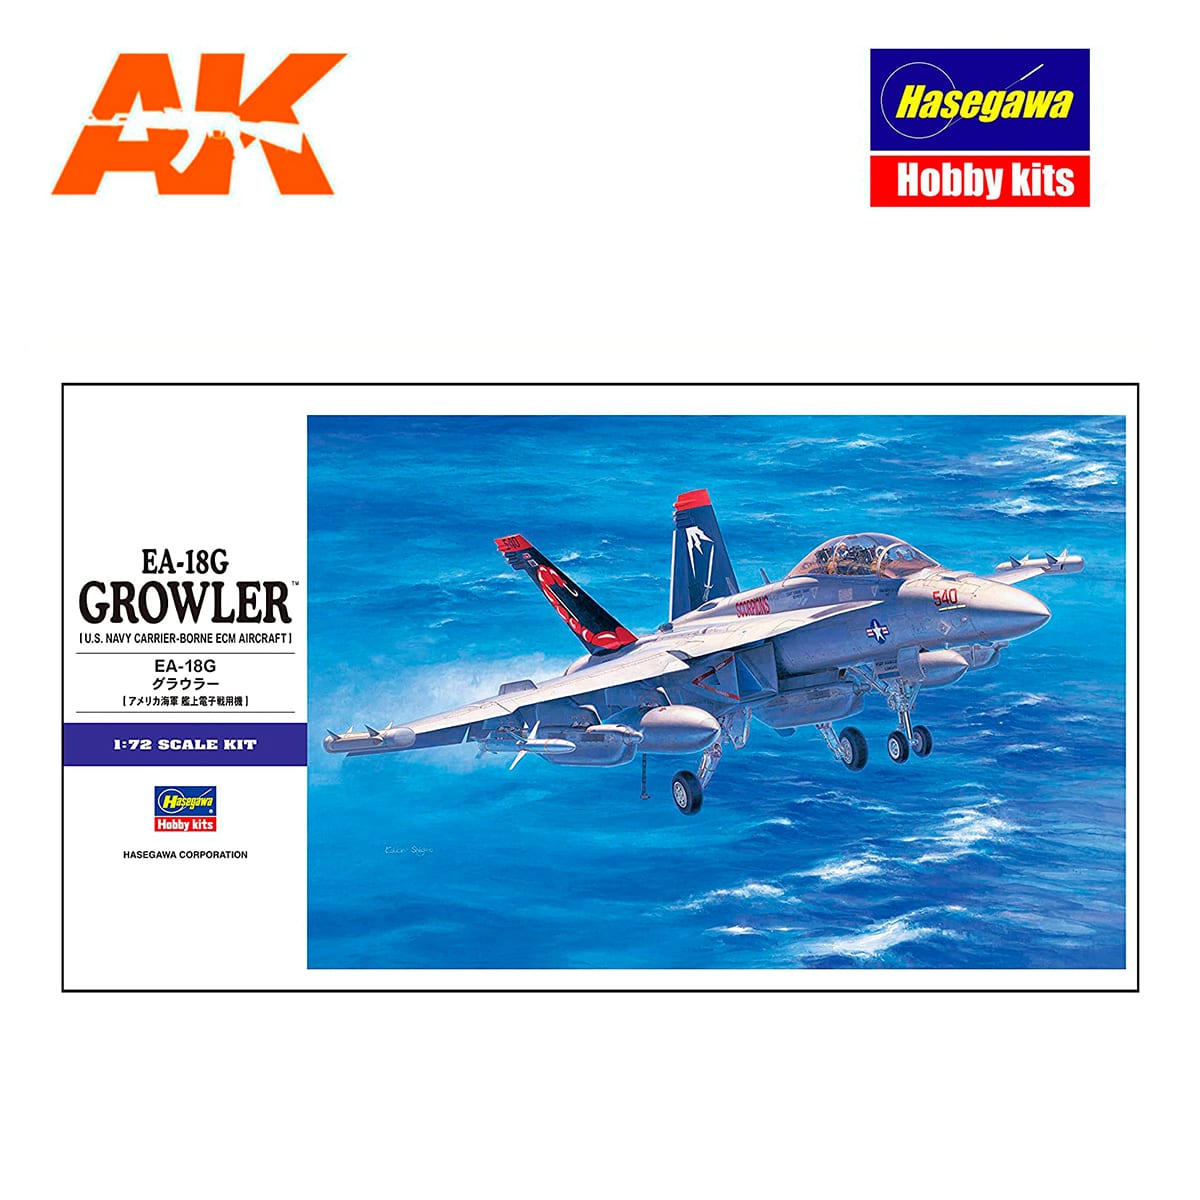 Hasegawa E38 US Navy Carrier Borne ECM Aircraft Ea-18g Growler 1/72 Scale Kit for sale online 